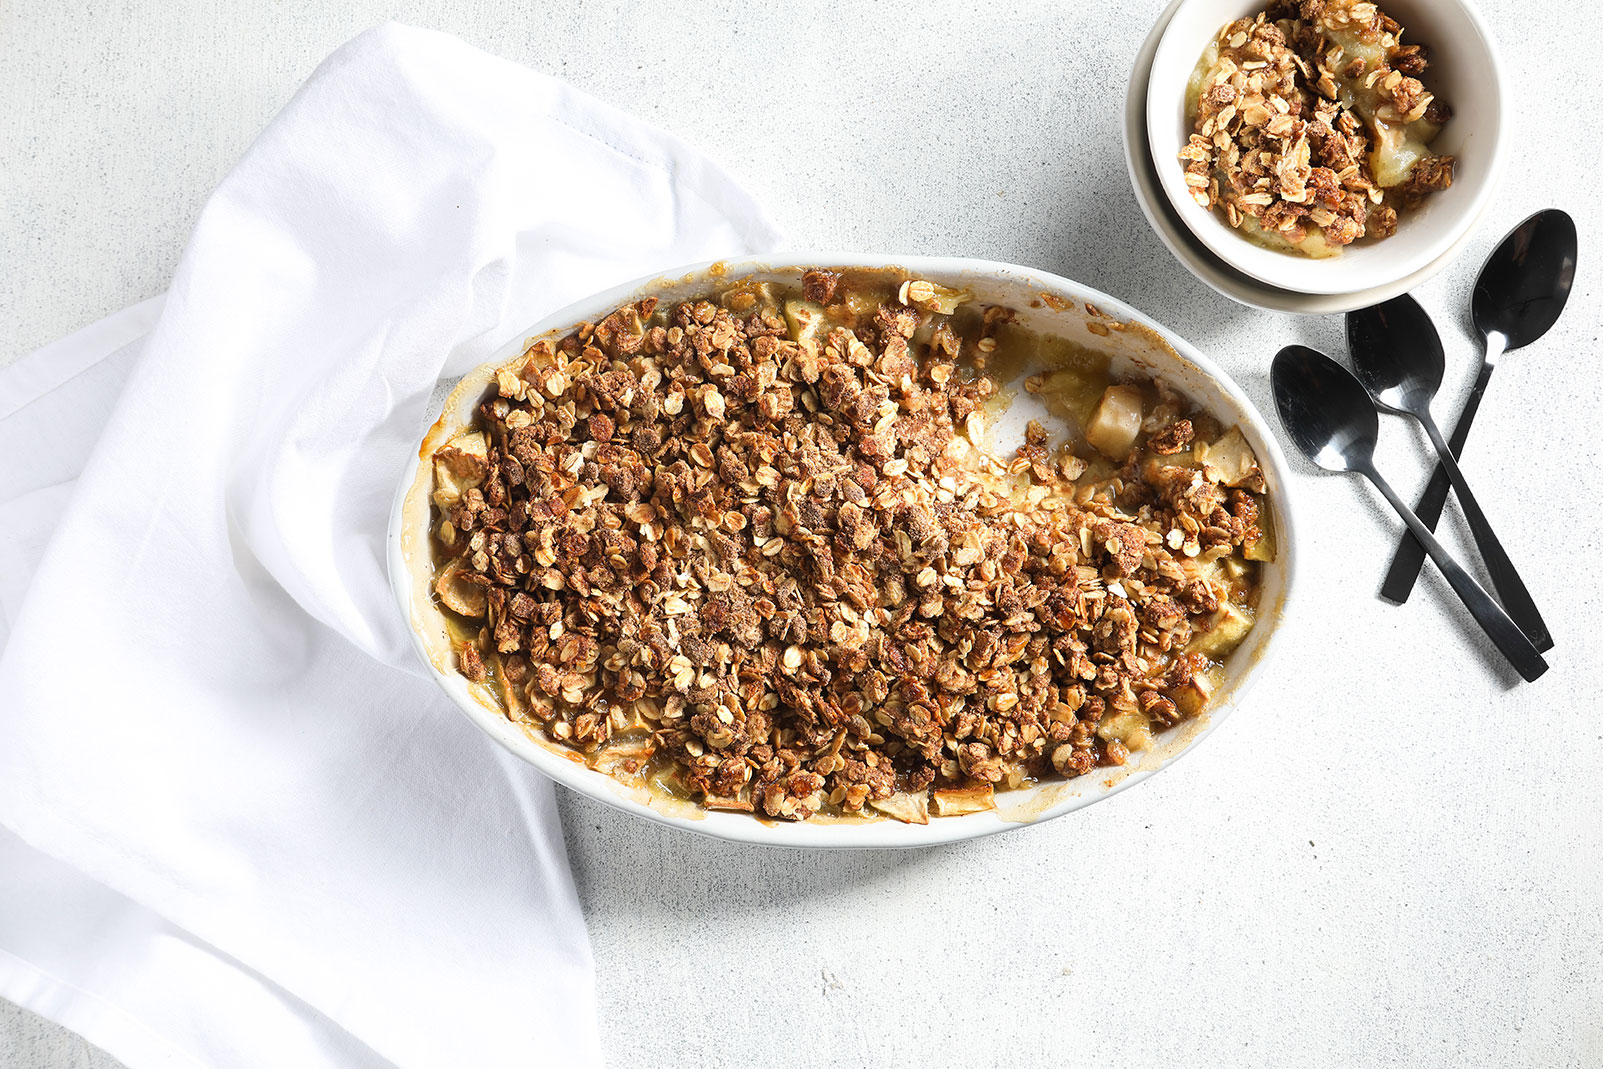 Image of baked healthy apple crumble recipe served in a large white dish with serving spoons and crumble in a small white bowl on the side